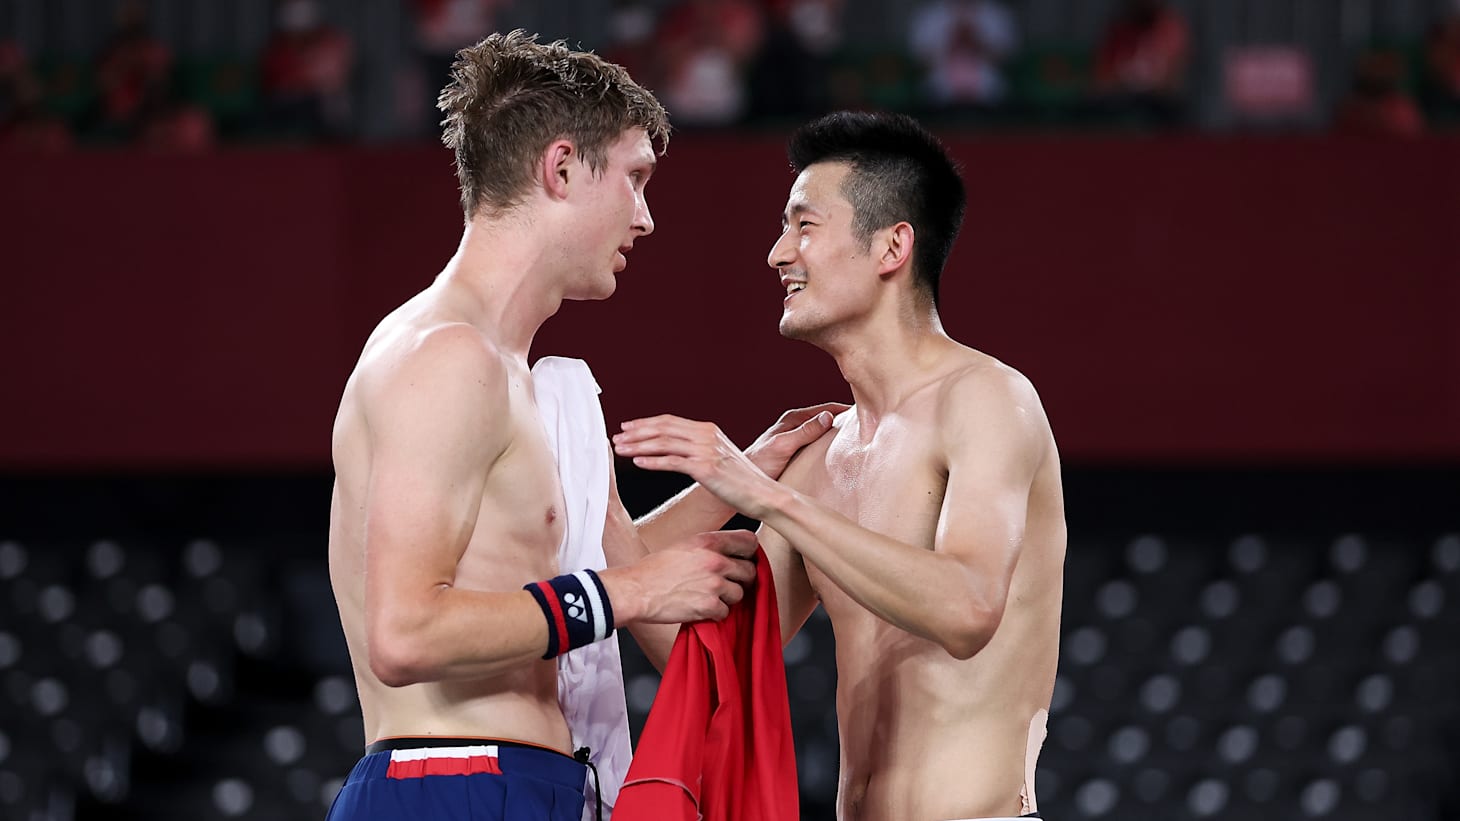 Dane Axelsen beats CHEN to gold in men's singles badminton; Ginting of  Indonesia takes bronze